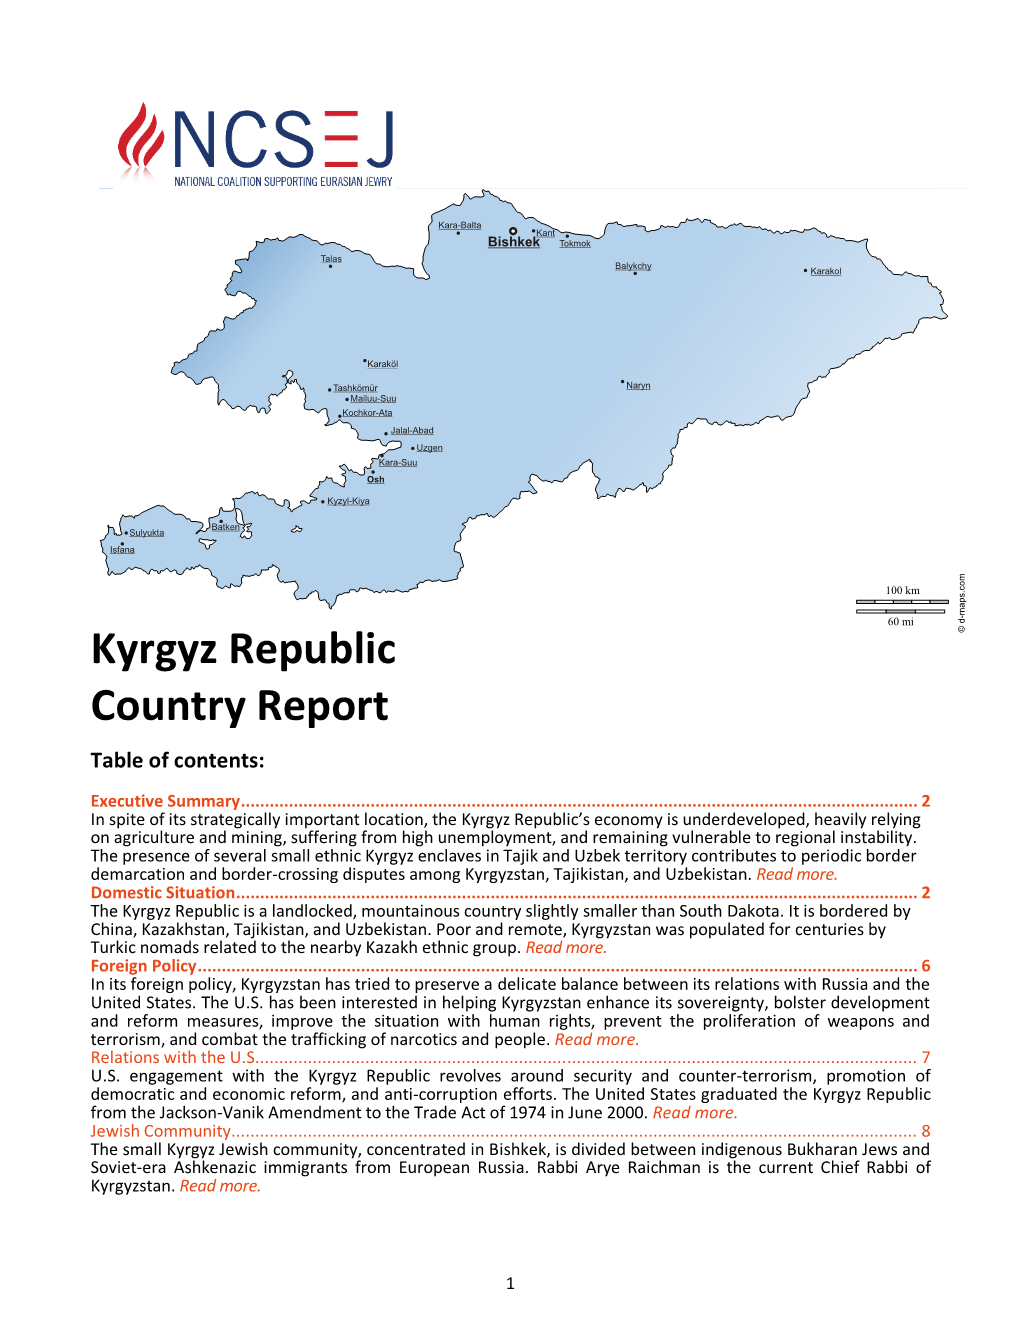 Kyrgyz Republic Country Report Table of Contents